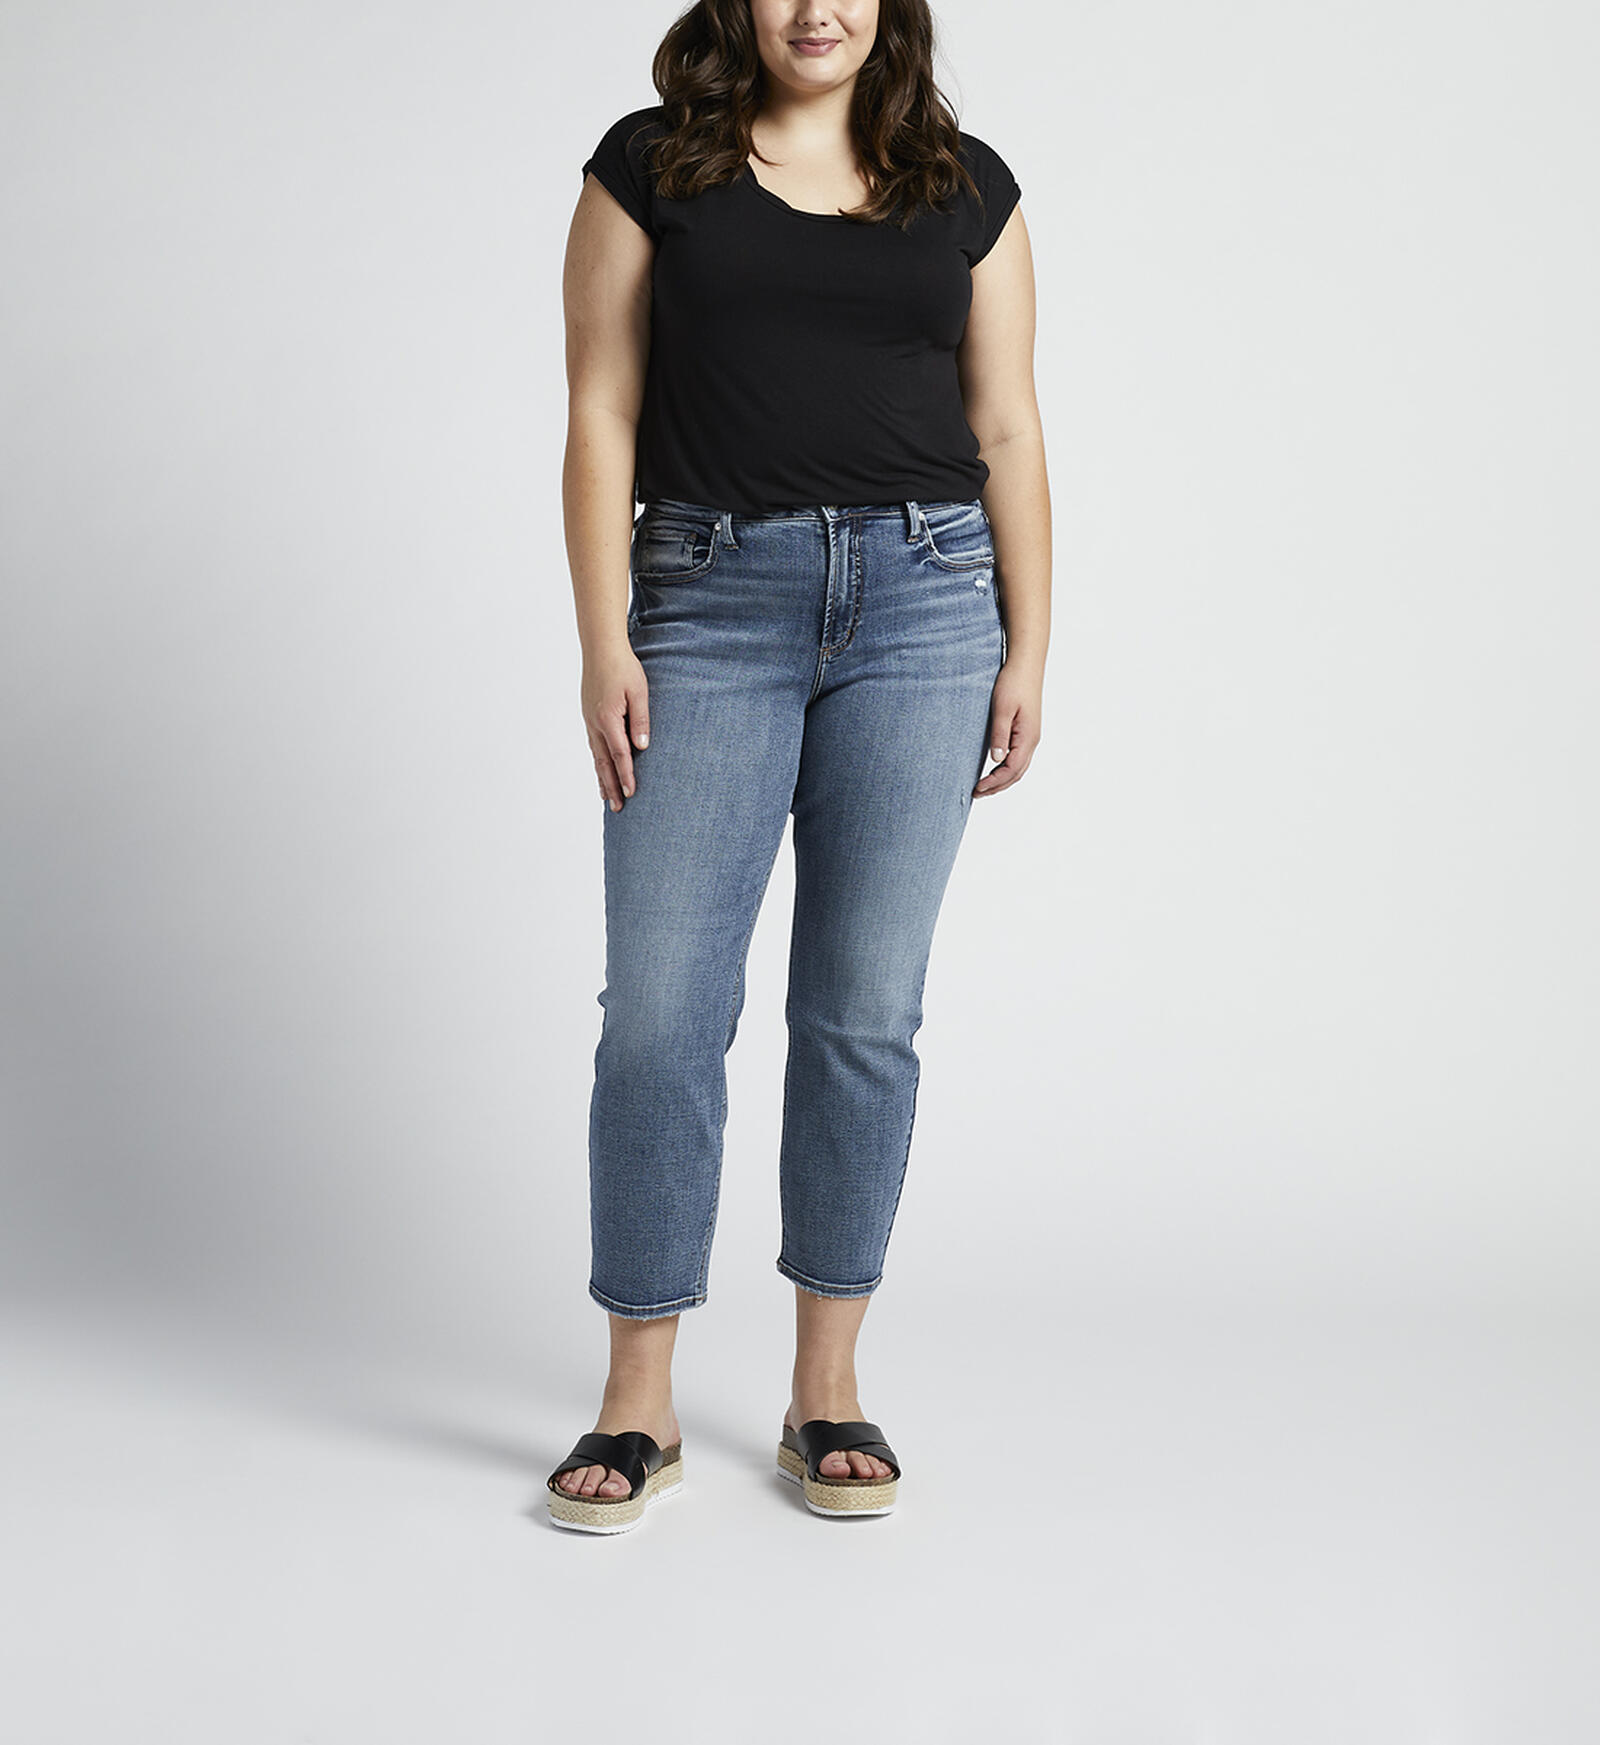 Buy Avery High Rise Straight Crop Jeans Plus Size for USD 33.00